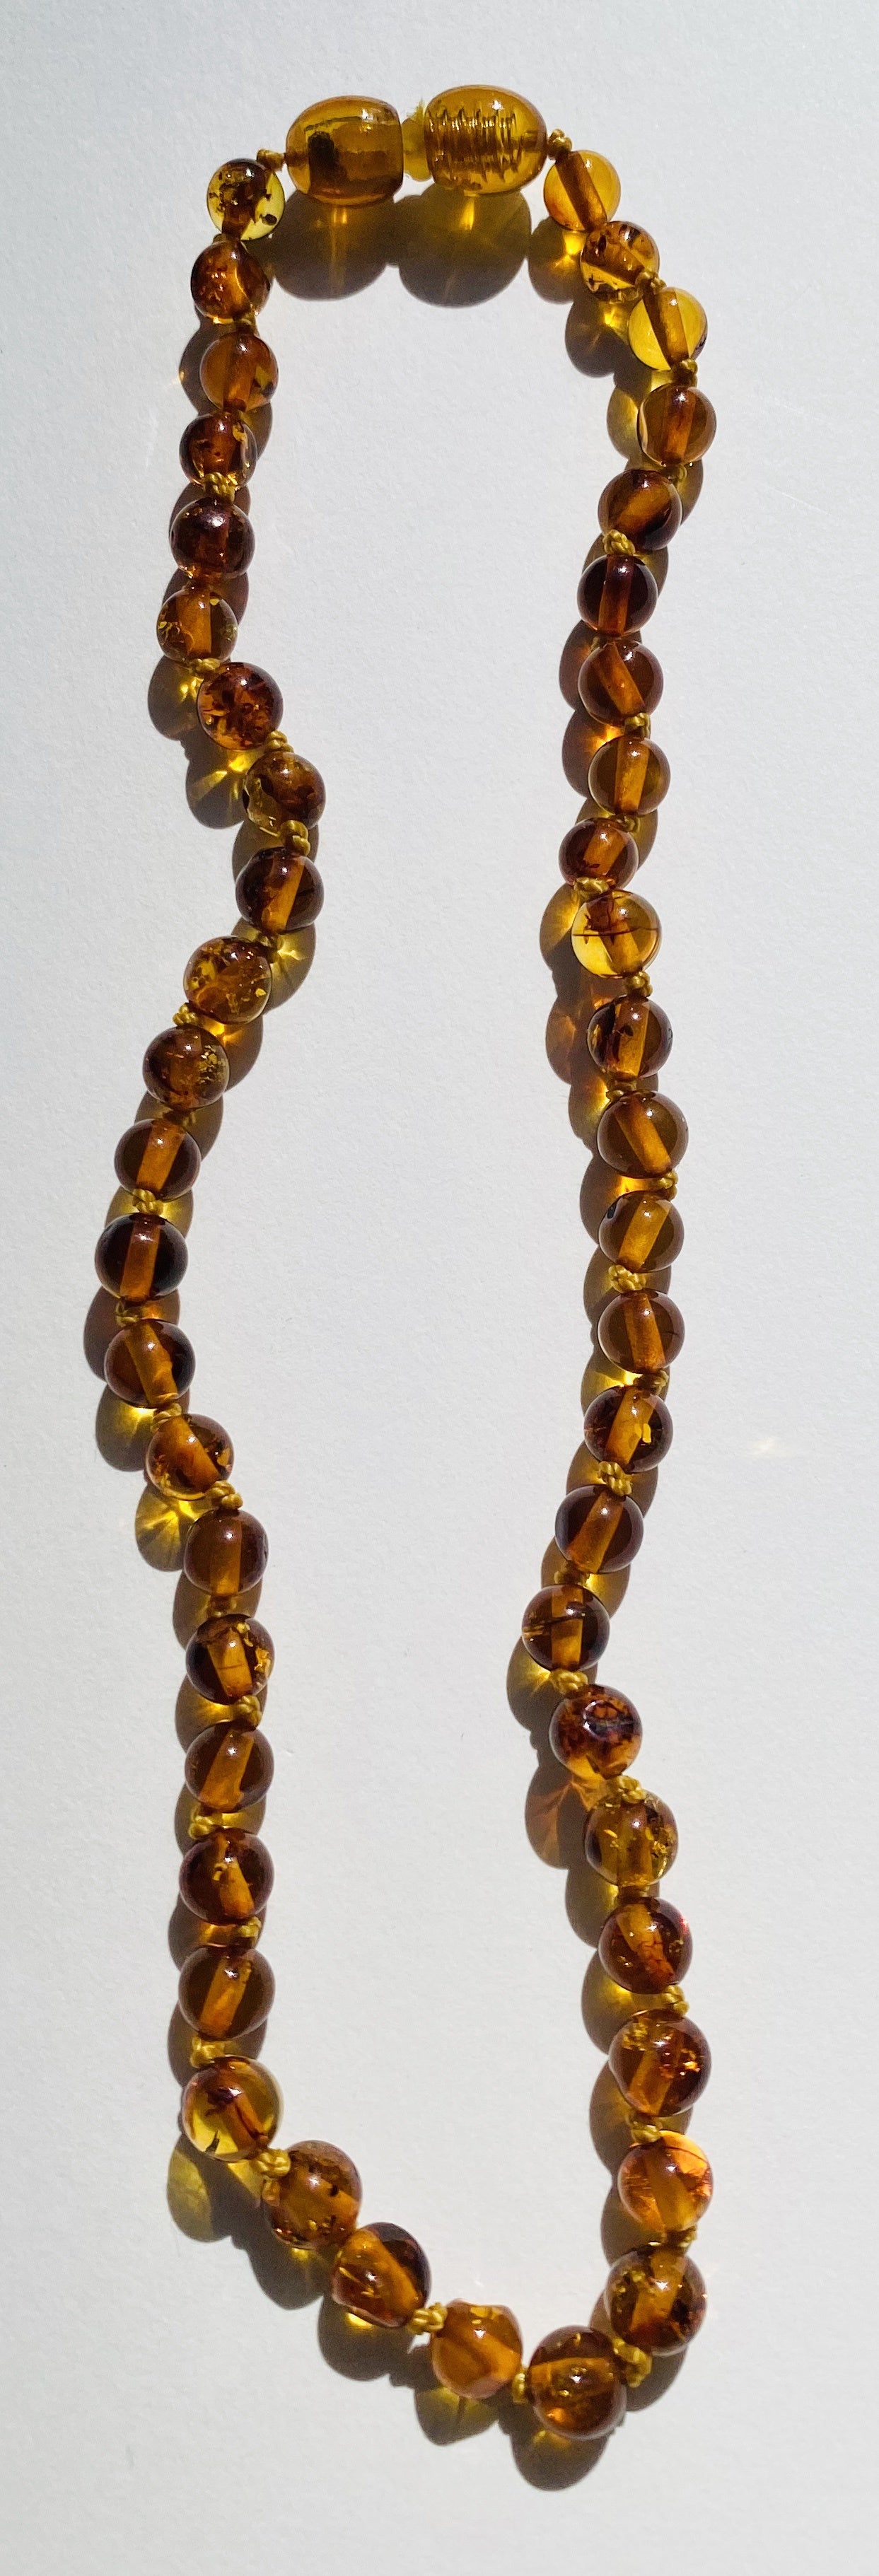 Hand Knotted Amber Baby Teething Necklaces Honey Round